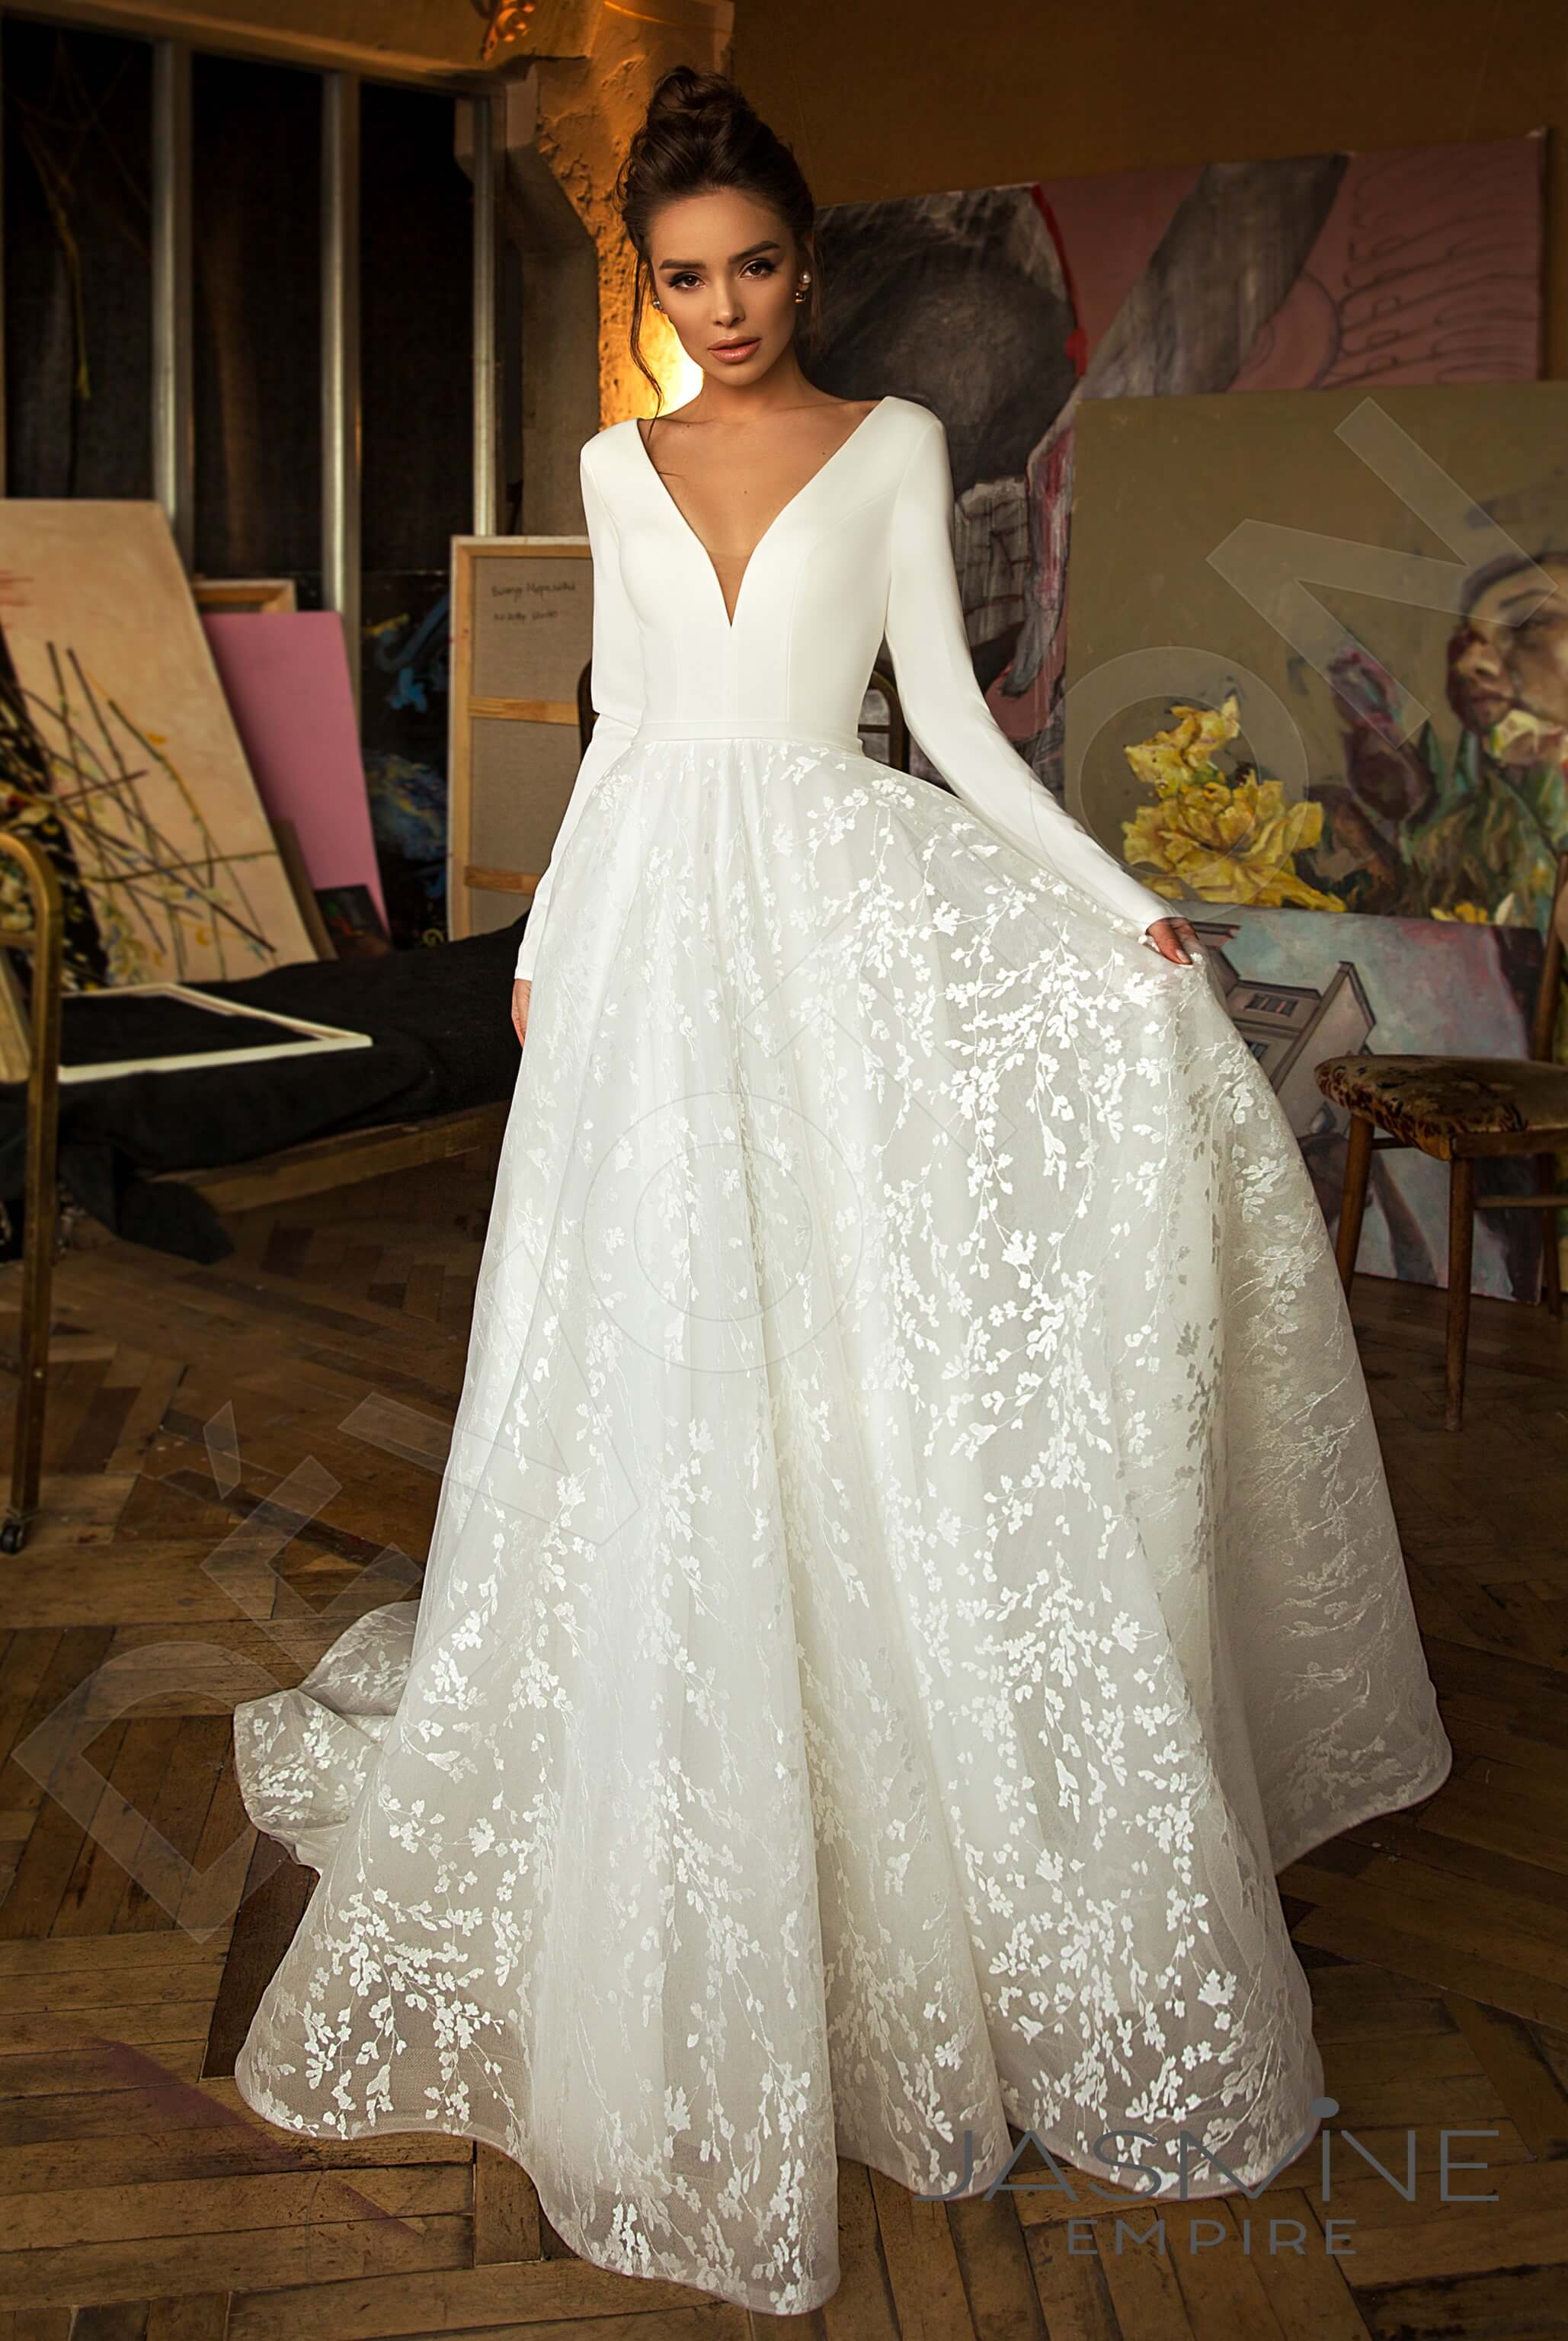 40 Modern Classic Statement-Making Wedding Dresses For the Contemporary  Bride - Praise Wedding